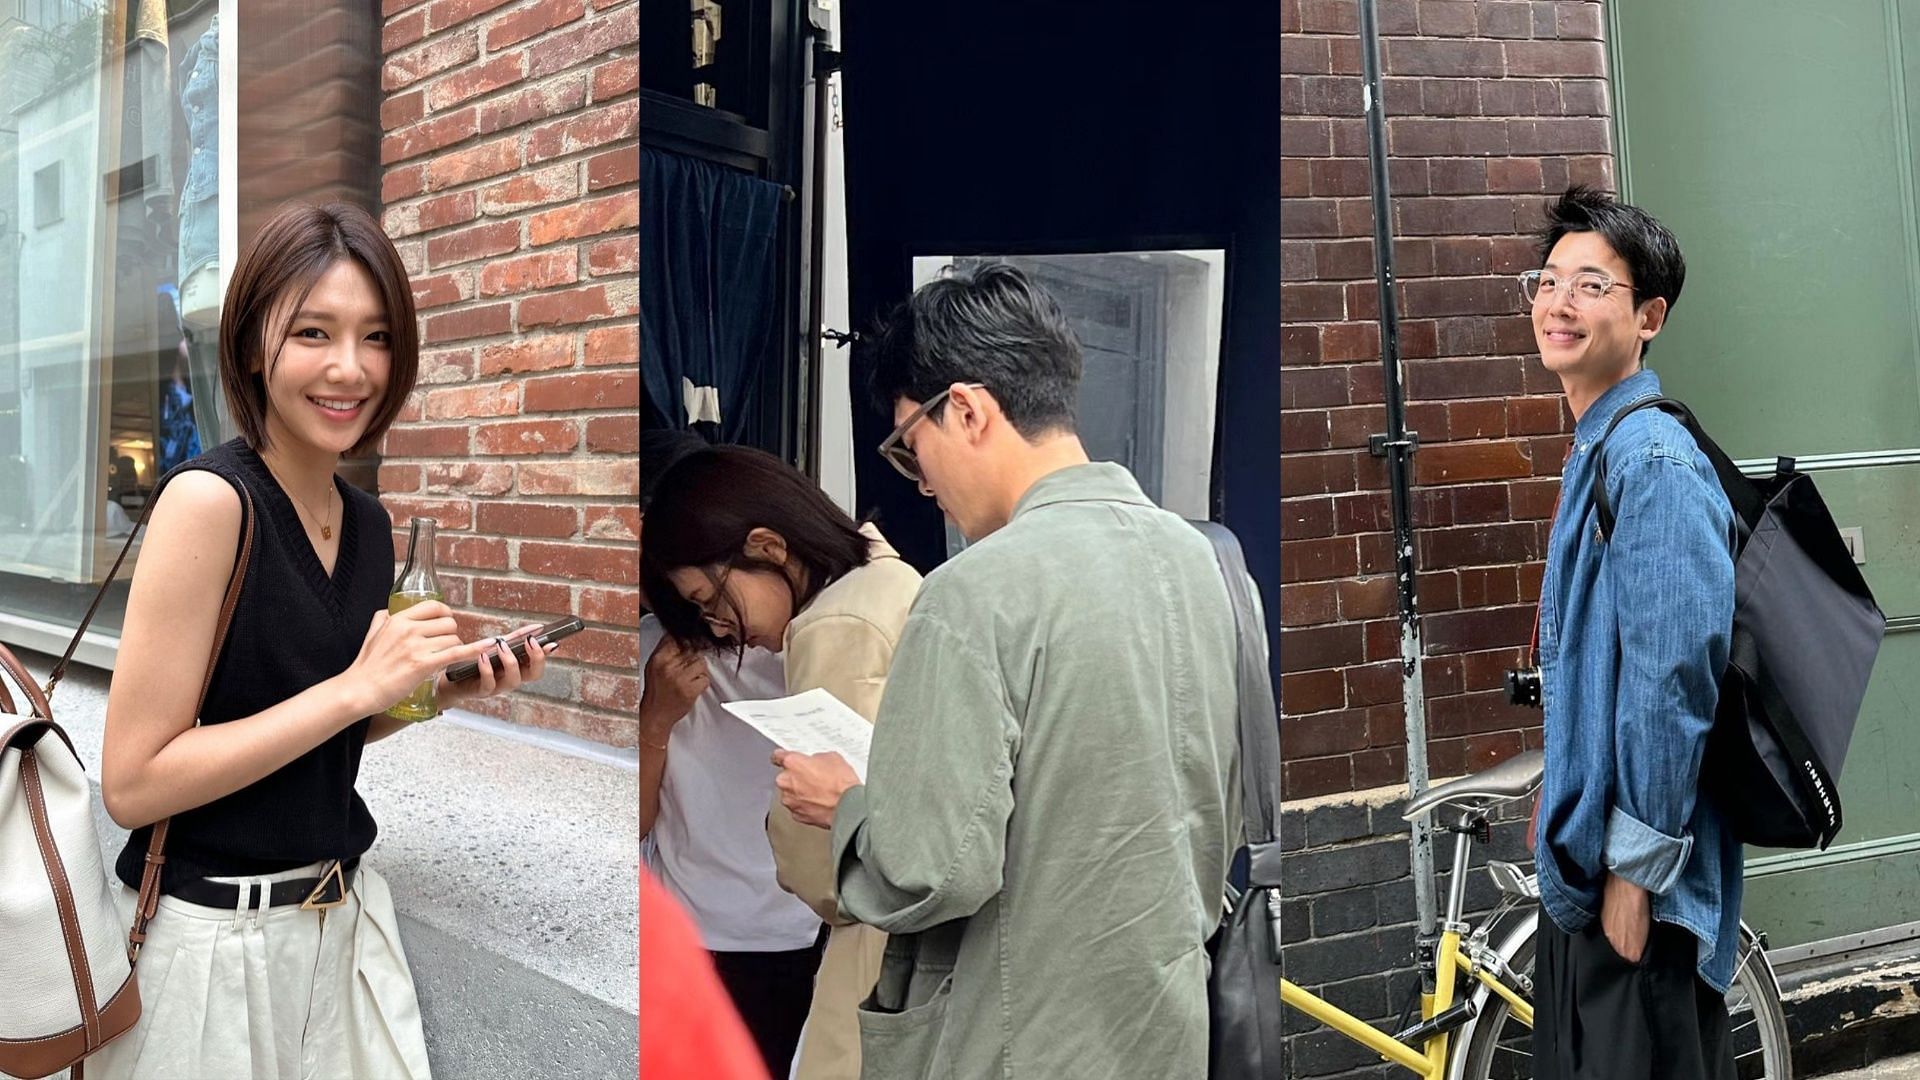 Sooyoung and Jung Kyung-ho spotted on a date in London (Images via Instagram/sooyoungchoi, jstar_allallj and Twitter/syoungshine)